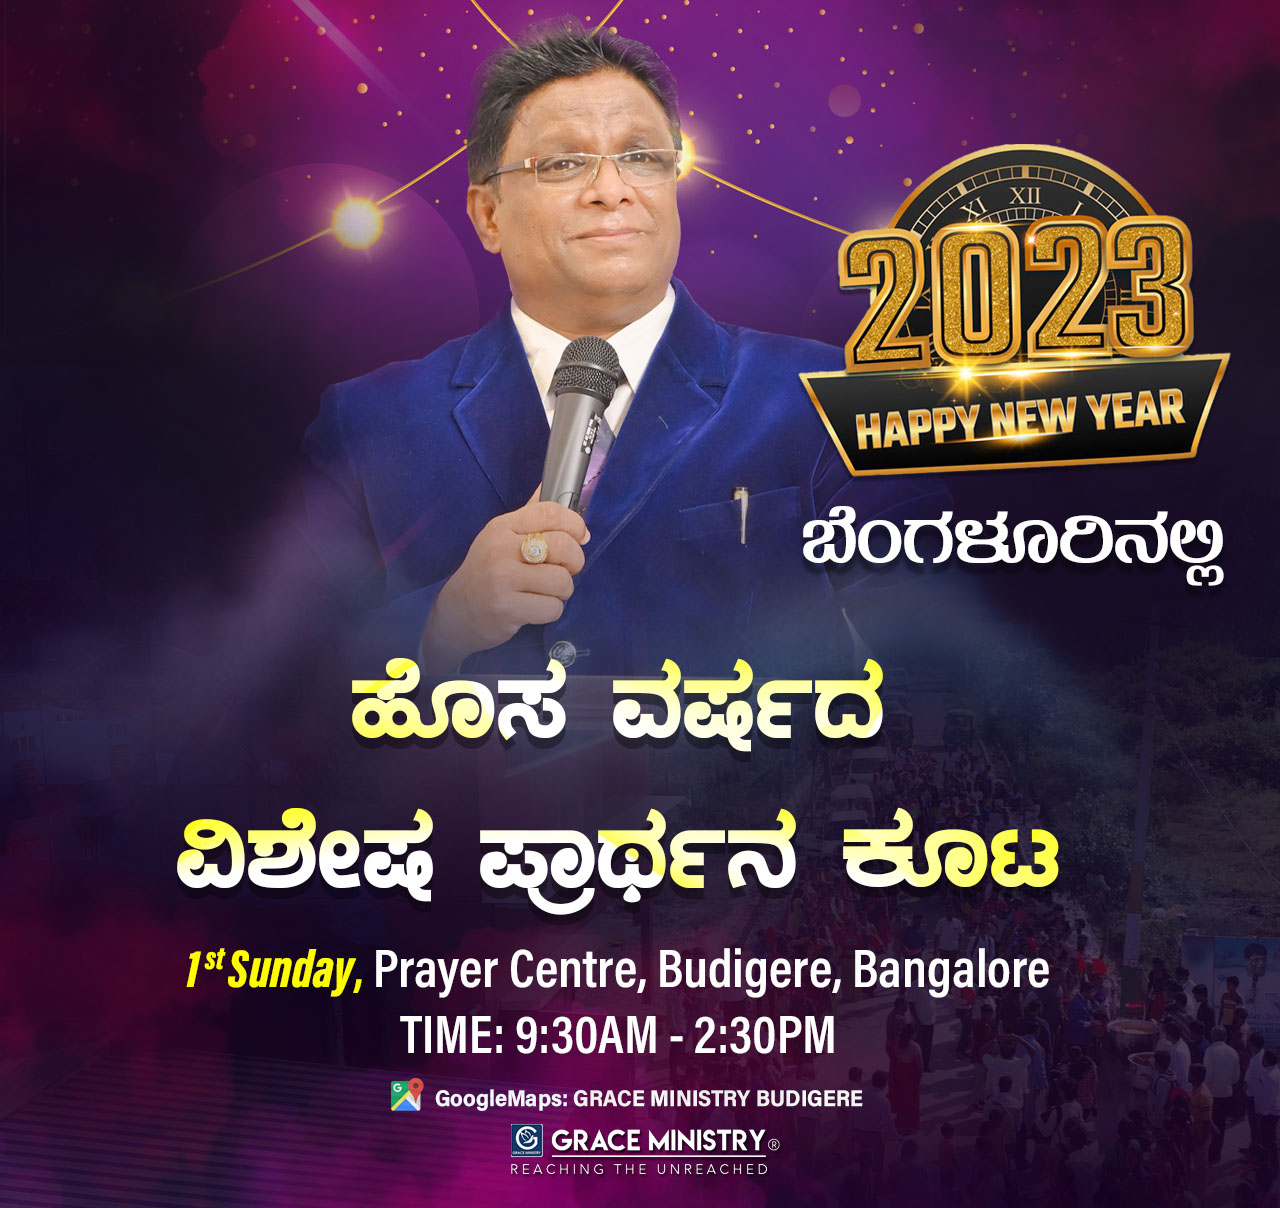 Join the New Year 2023 Blessing Prayer Service in Bangalore by Grace Ministry held on the 1st of Jan, Sunday from 9:30am to 2:30pm at Prayer centre Budigere, Bangalore. Come and be a great blessing and know the promise verse for the year 2023 by the Lord's Servant Bro Andrew Richard.